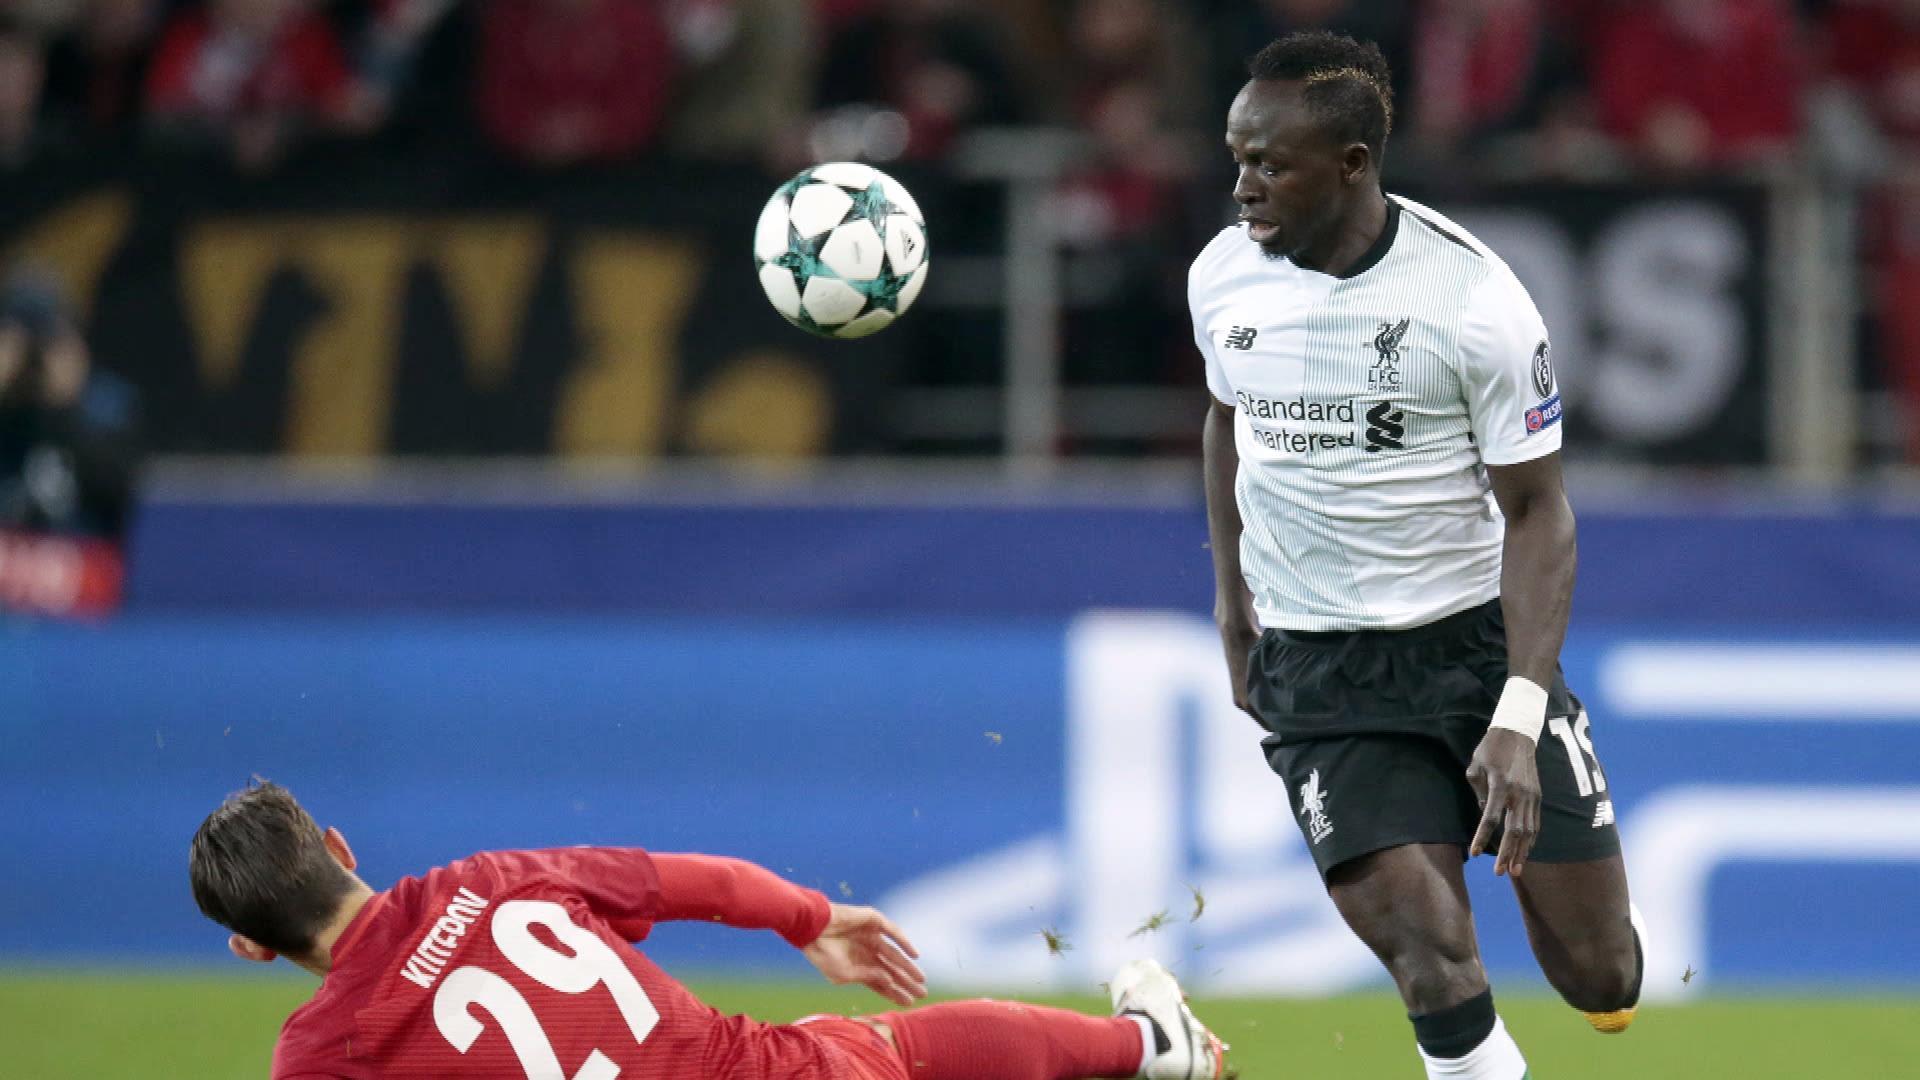 Liverpool's Sadio Mane out for extended period with hamstring injury